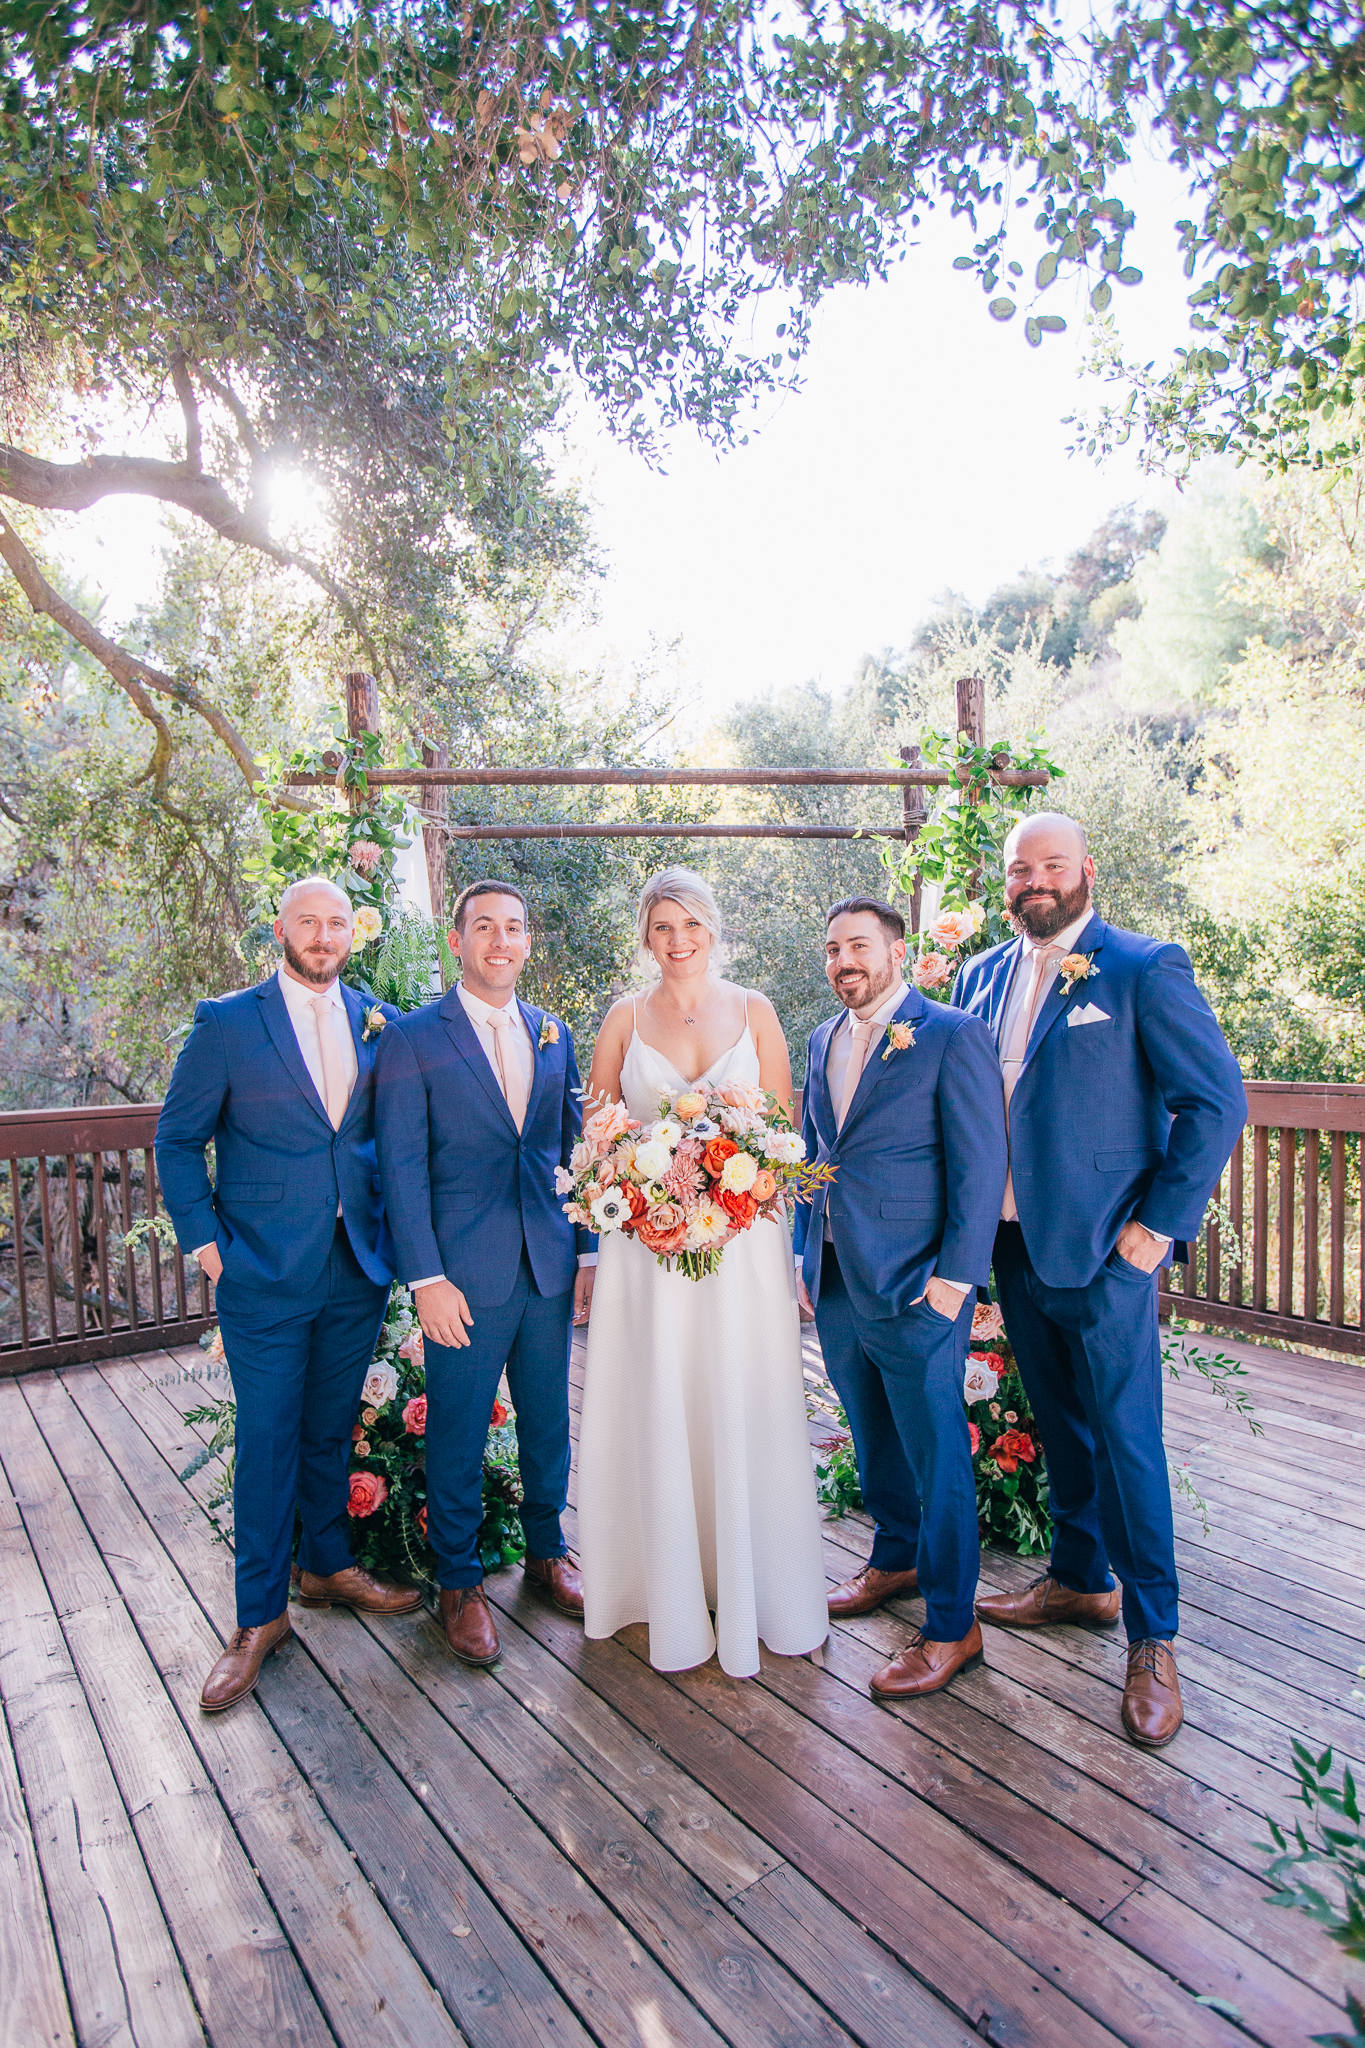 bride in spaghetti strap wedding dress stands with groomsmen in blue suits and light pink ties